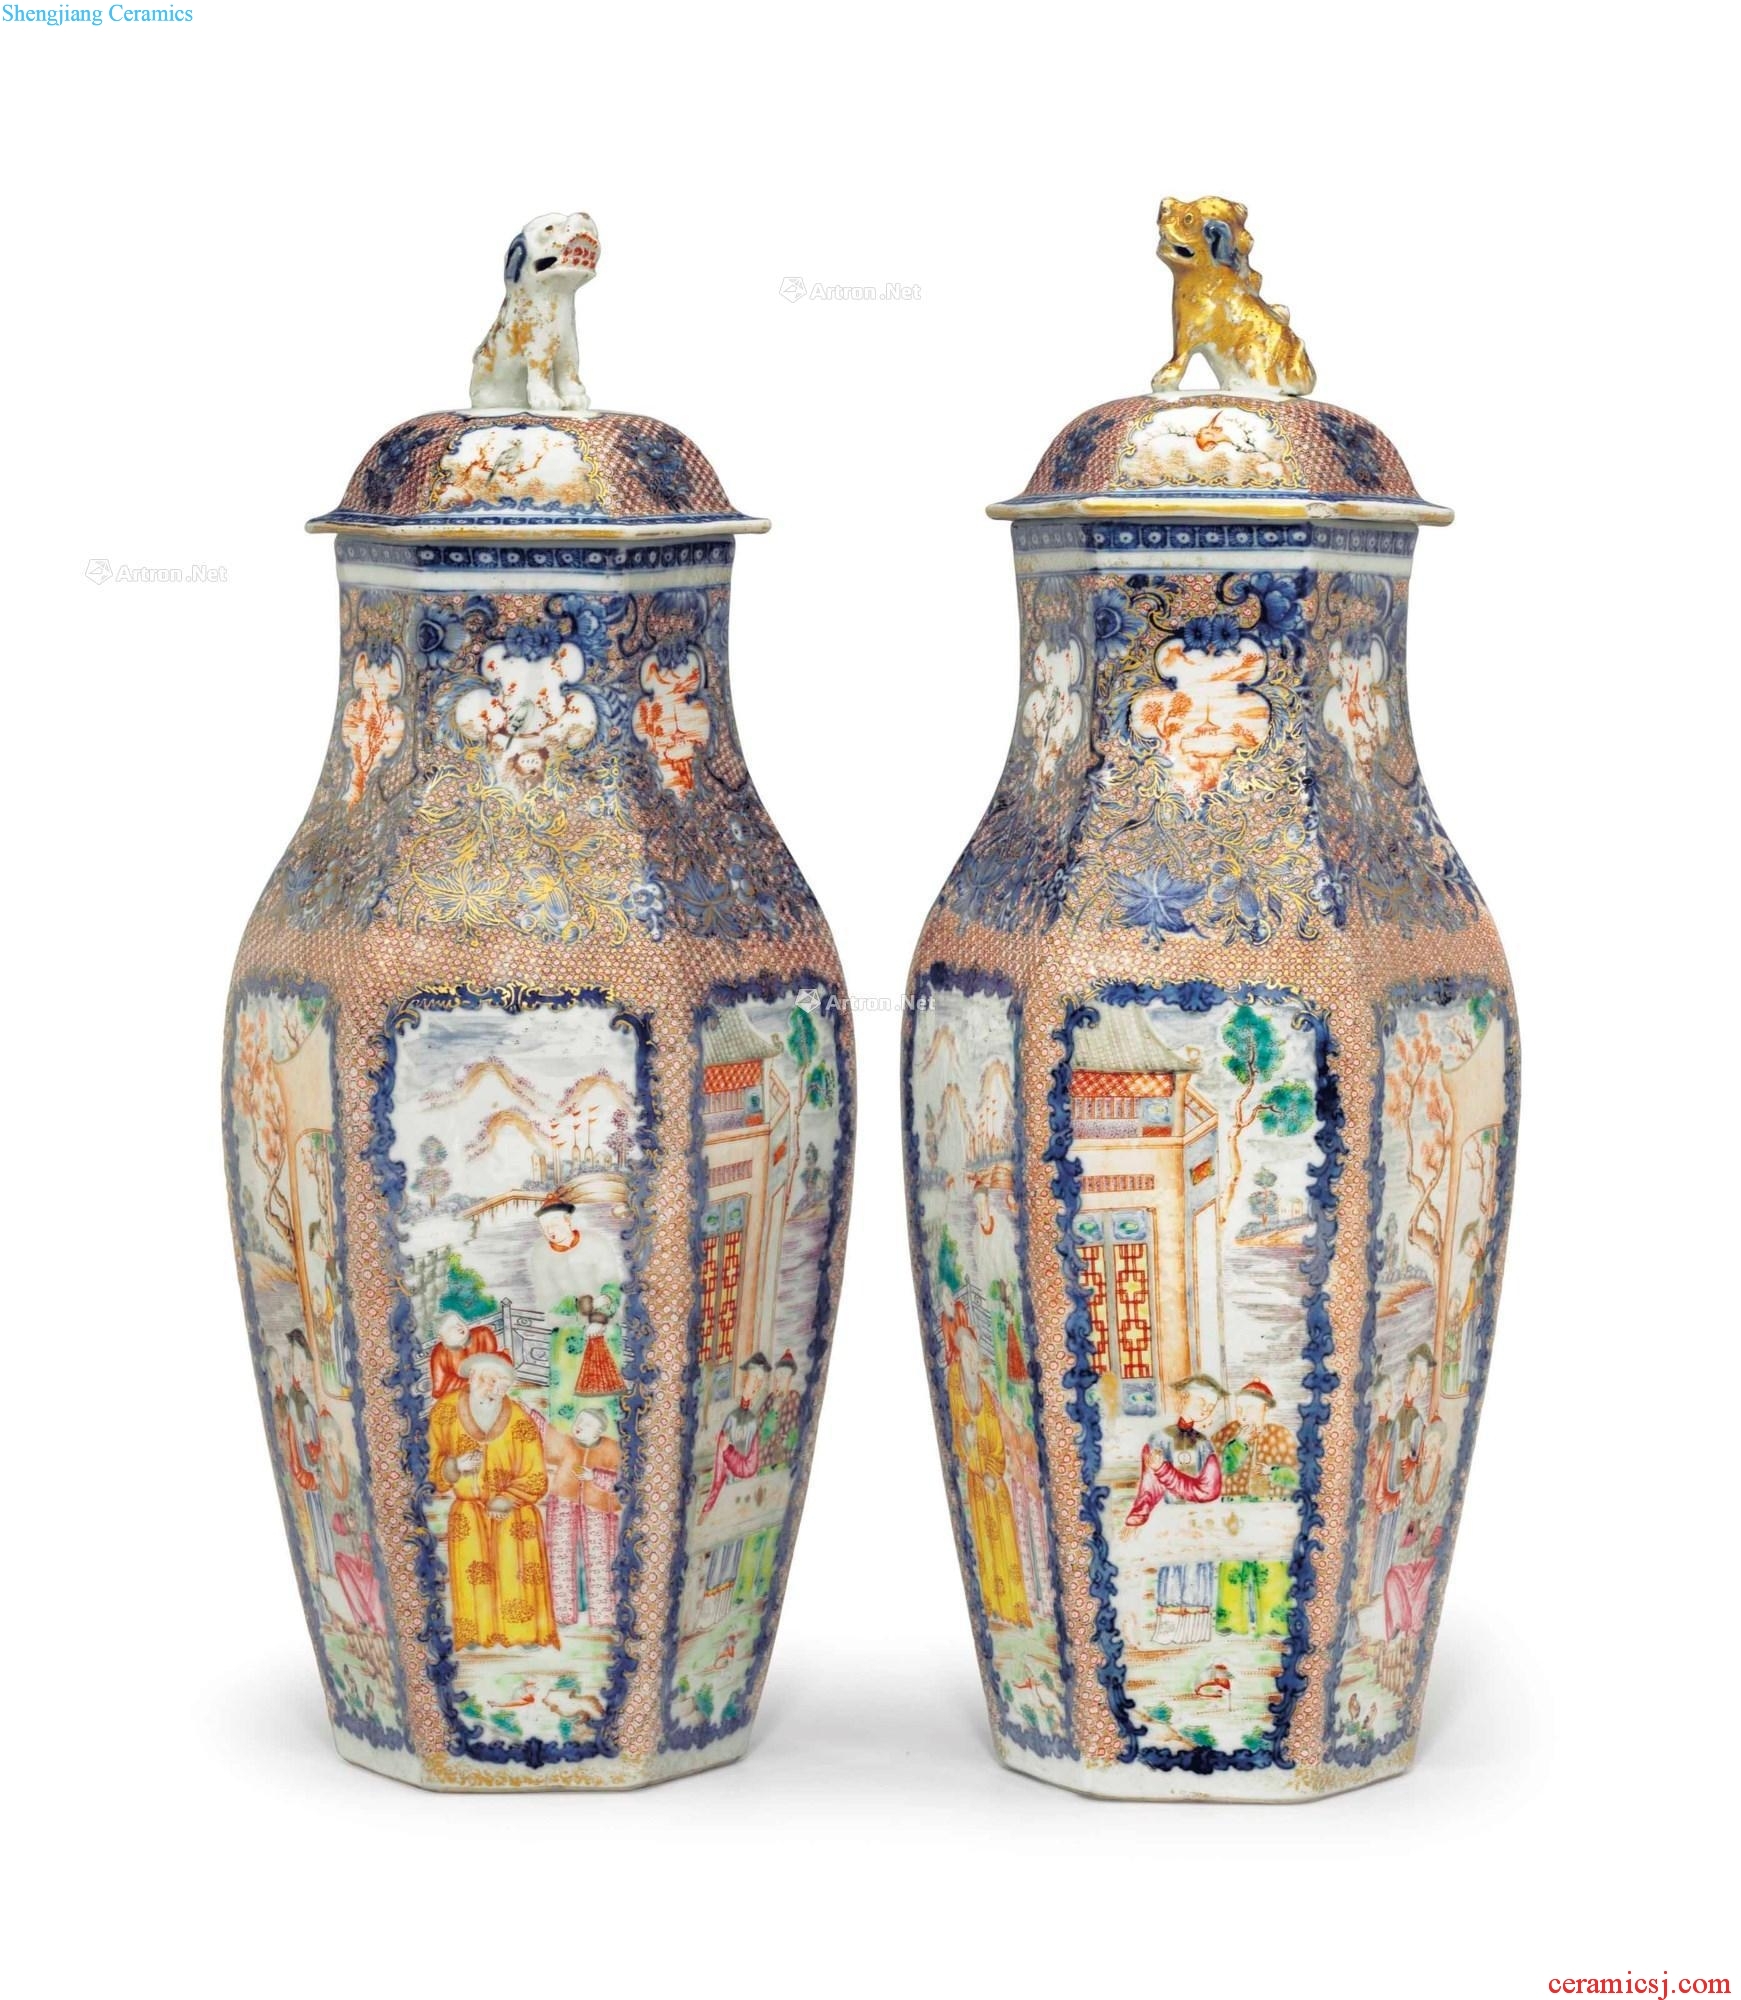 Qianlong period, about 1780, A LARGE PAIR OF FAMILLE ROSE AND UNDERGLAZE BLUE VASES AND COVERS